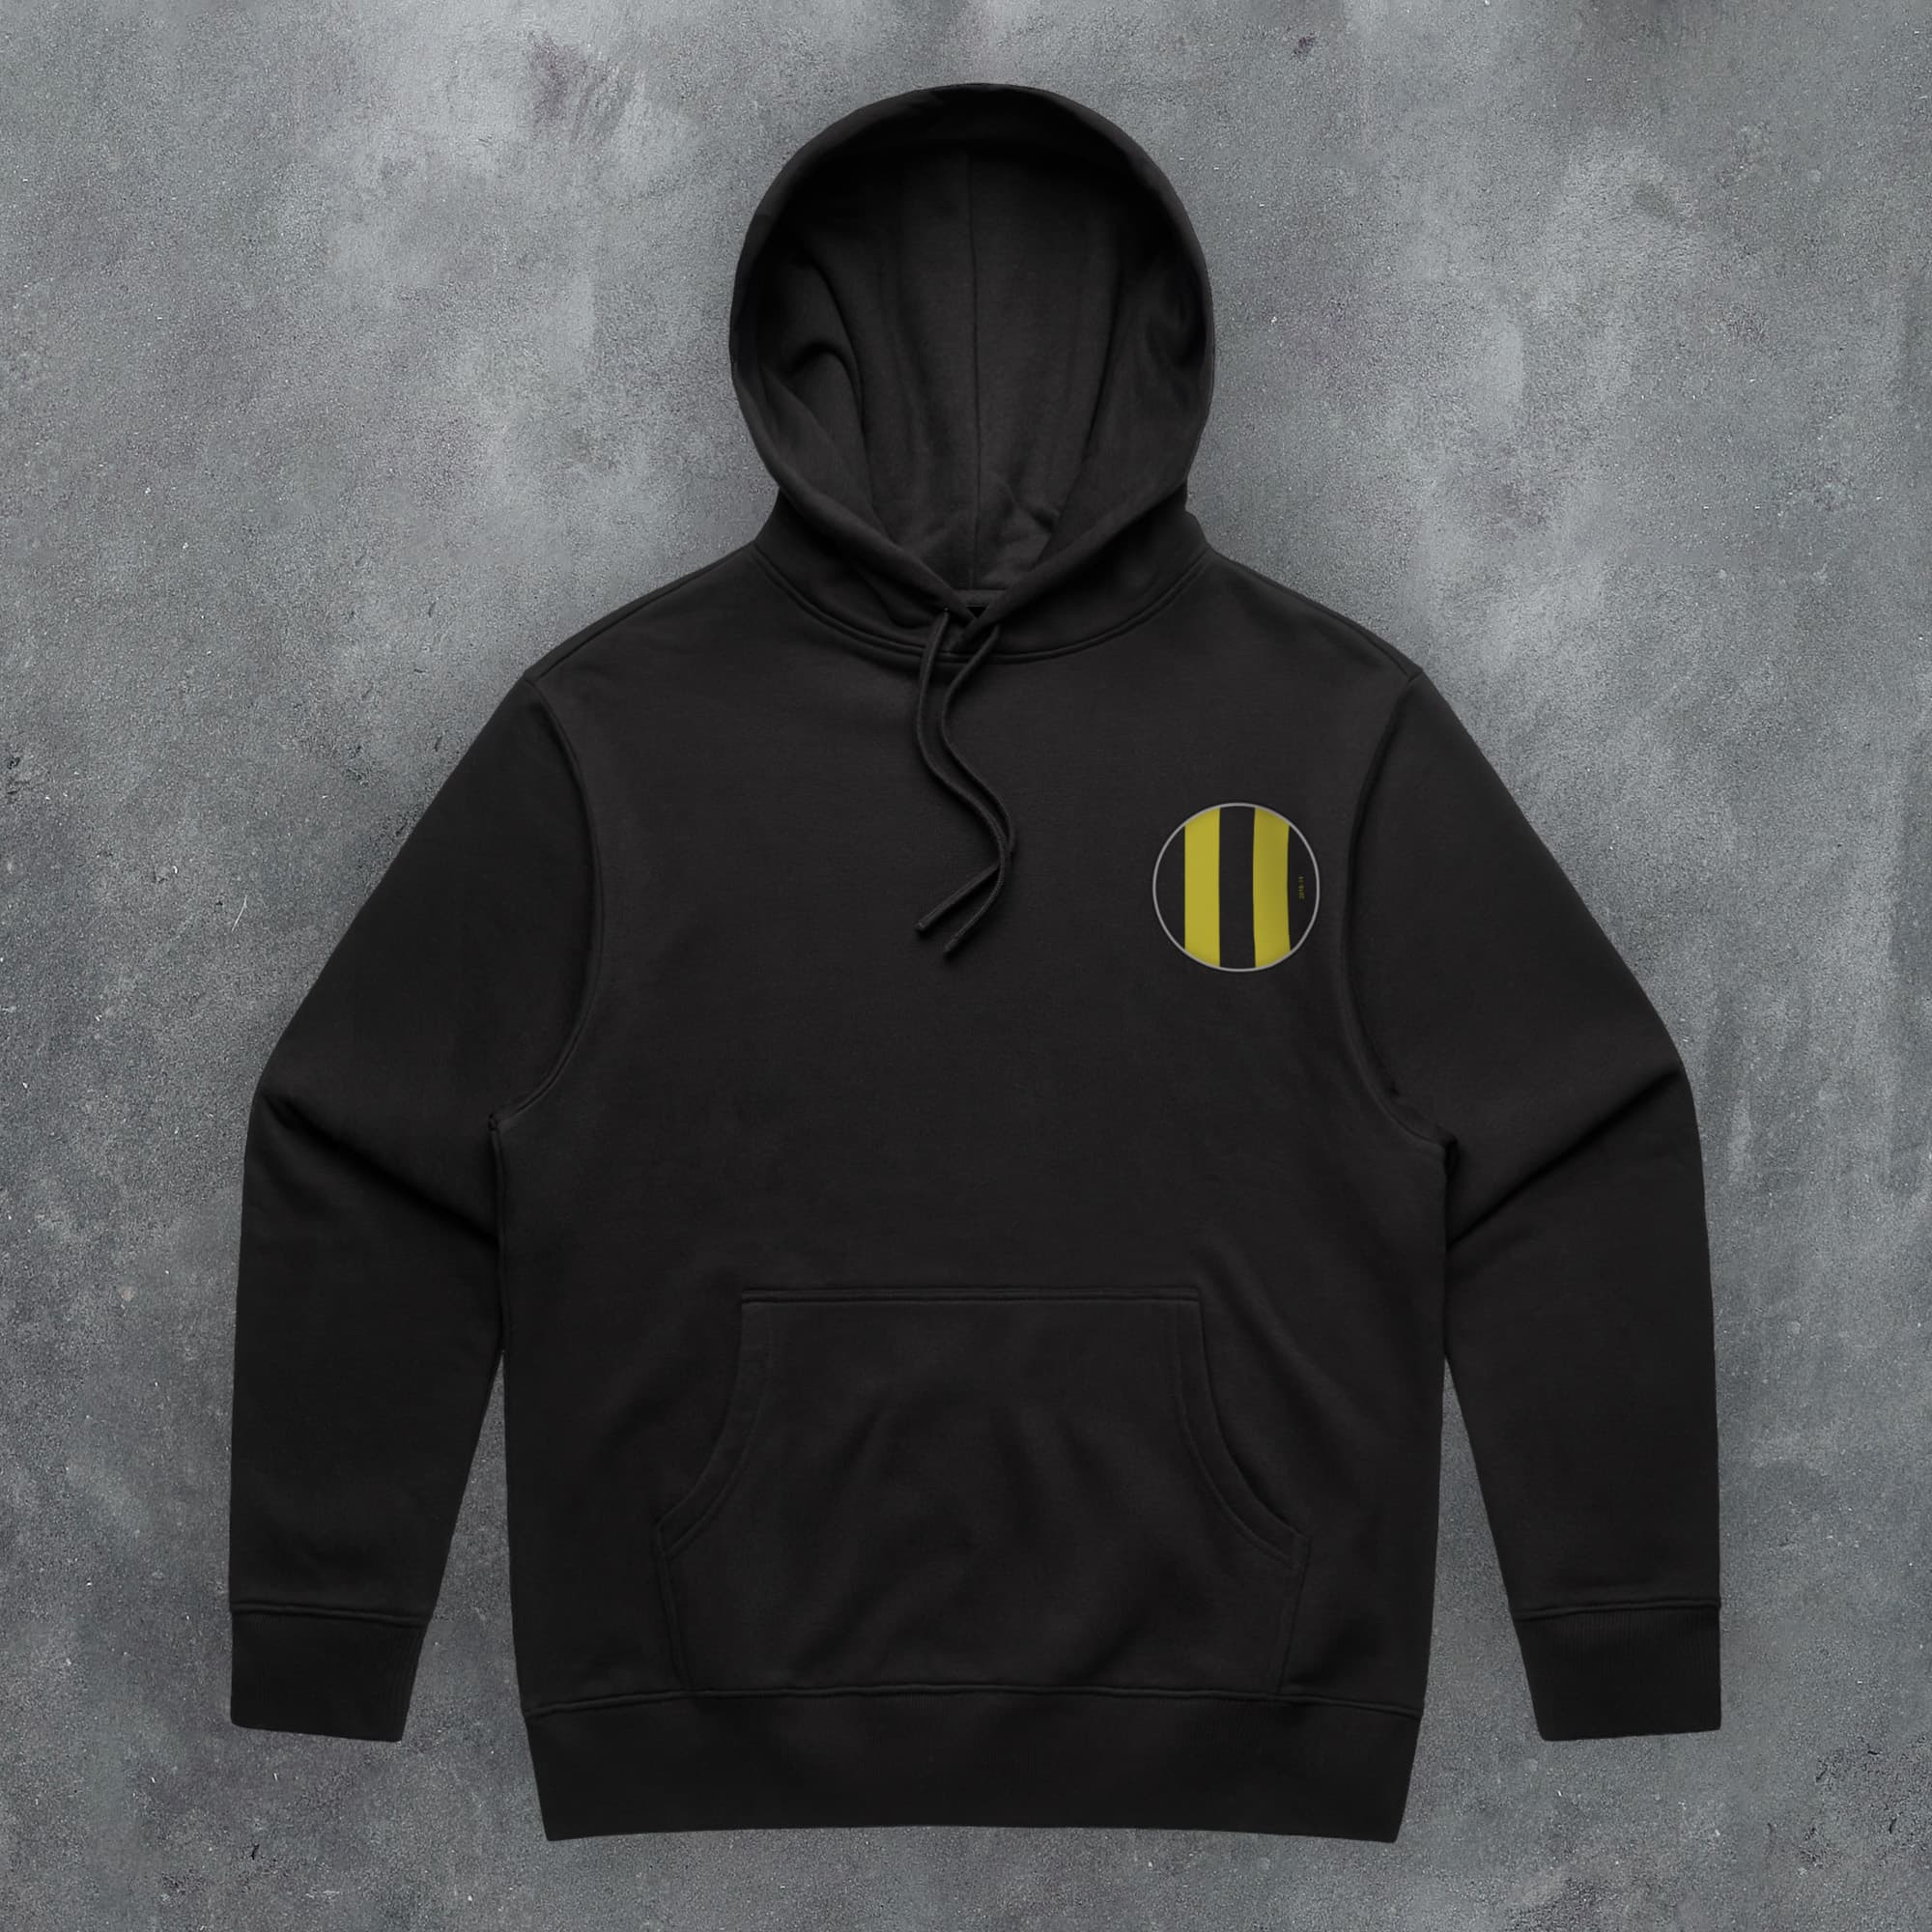 a black hoodie with a yellow and black stripe on it